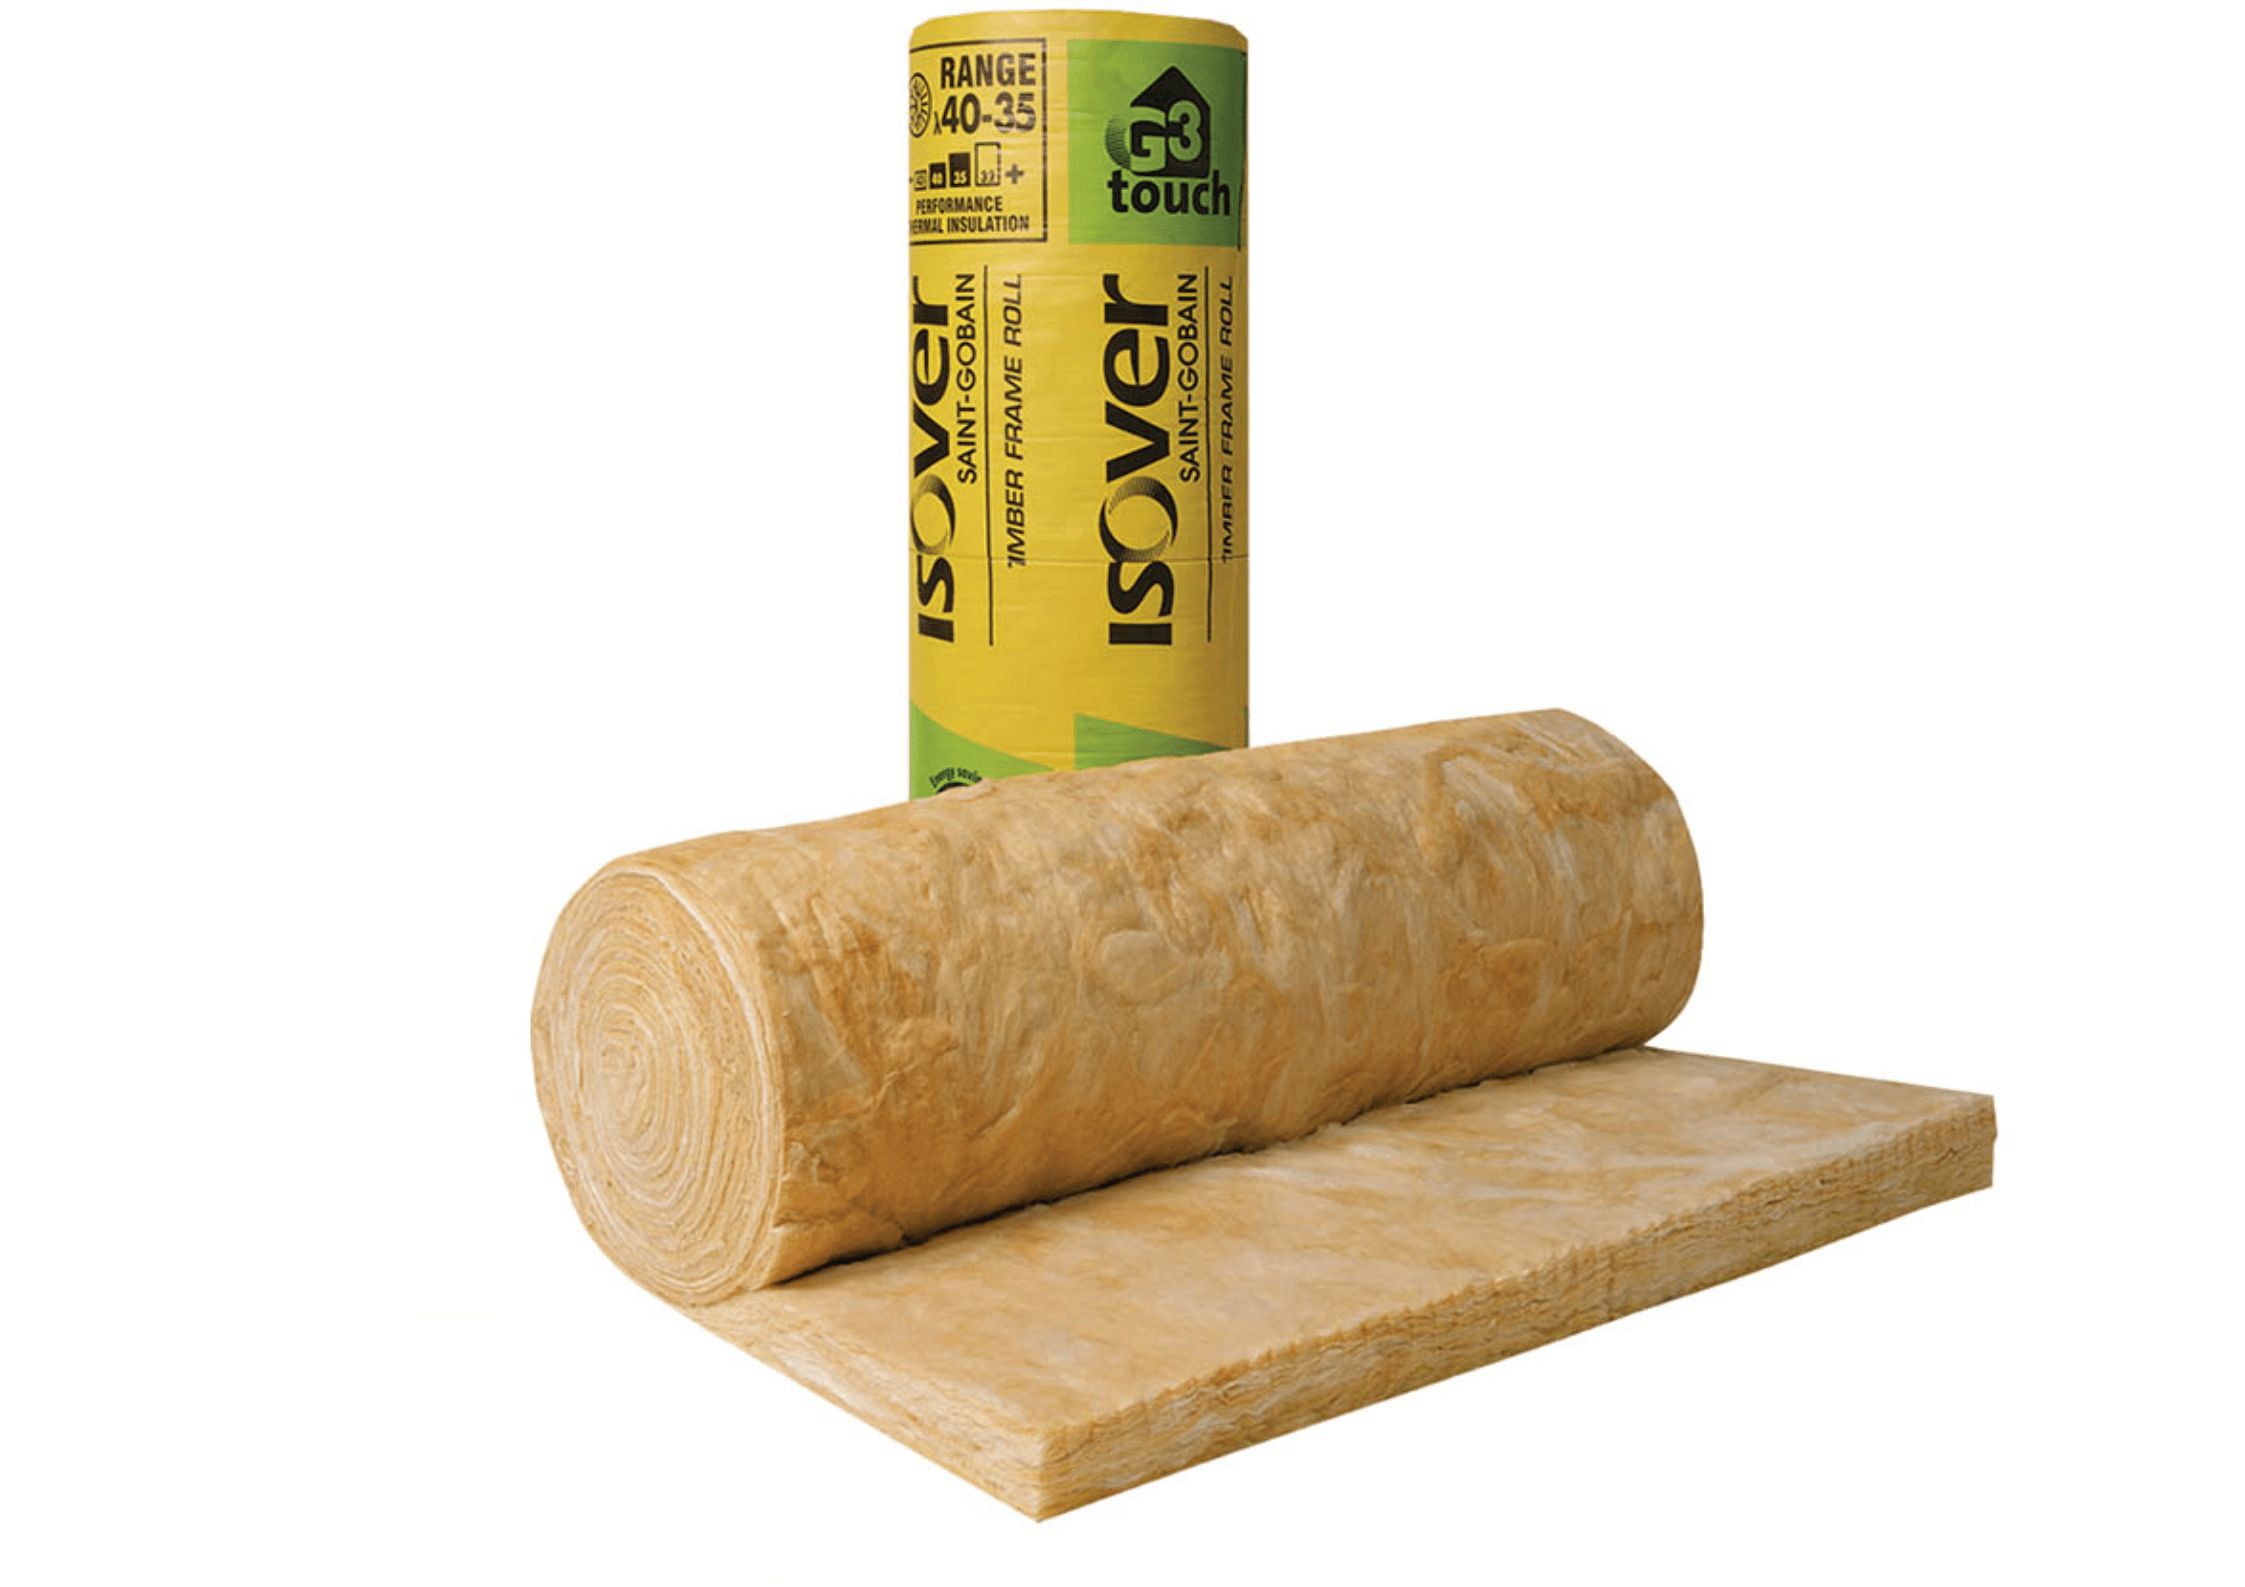 Isover Insulation Isover Timber Frame Party Wall Insulation Roll Isover Spacesaver Lite Insulation Roll | insulationuk.co.uk